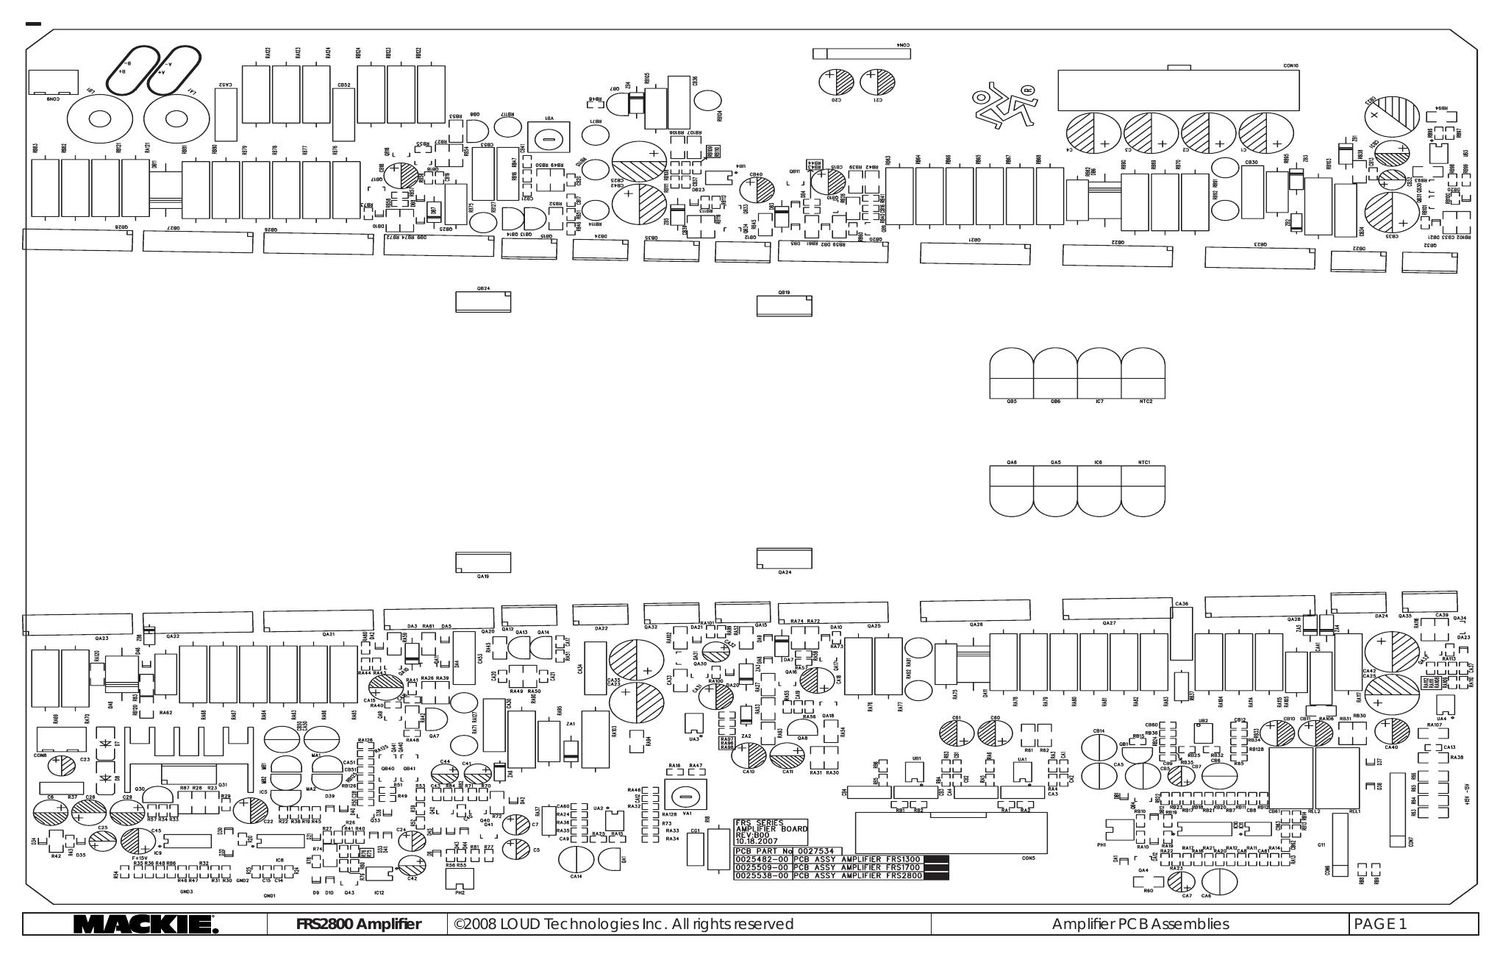 Mackie FRS2800 Main Schematic Layout